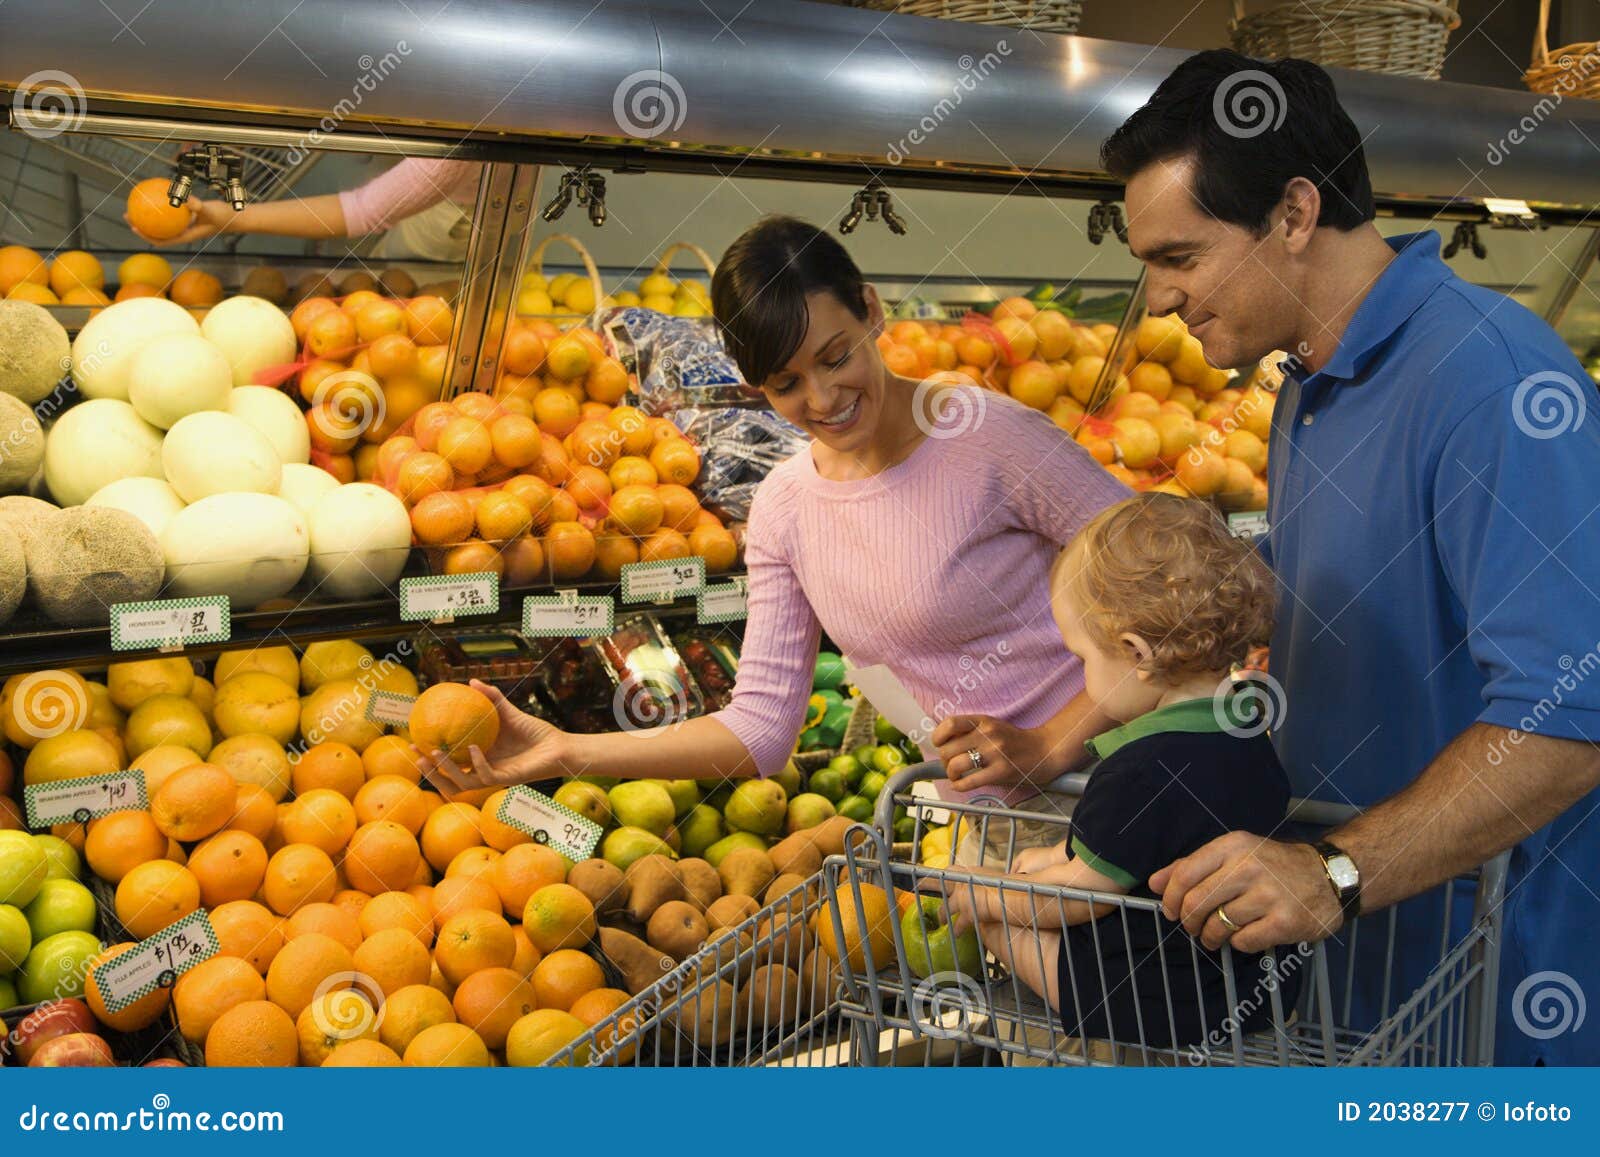 family grocery shopping.